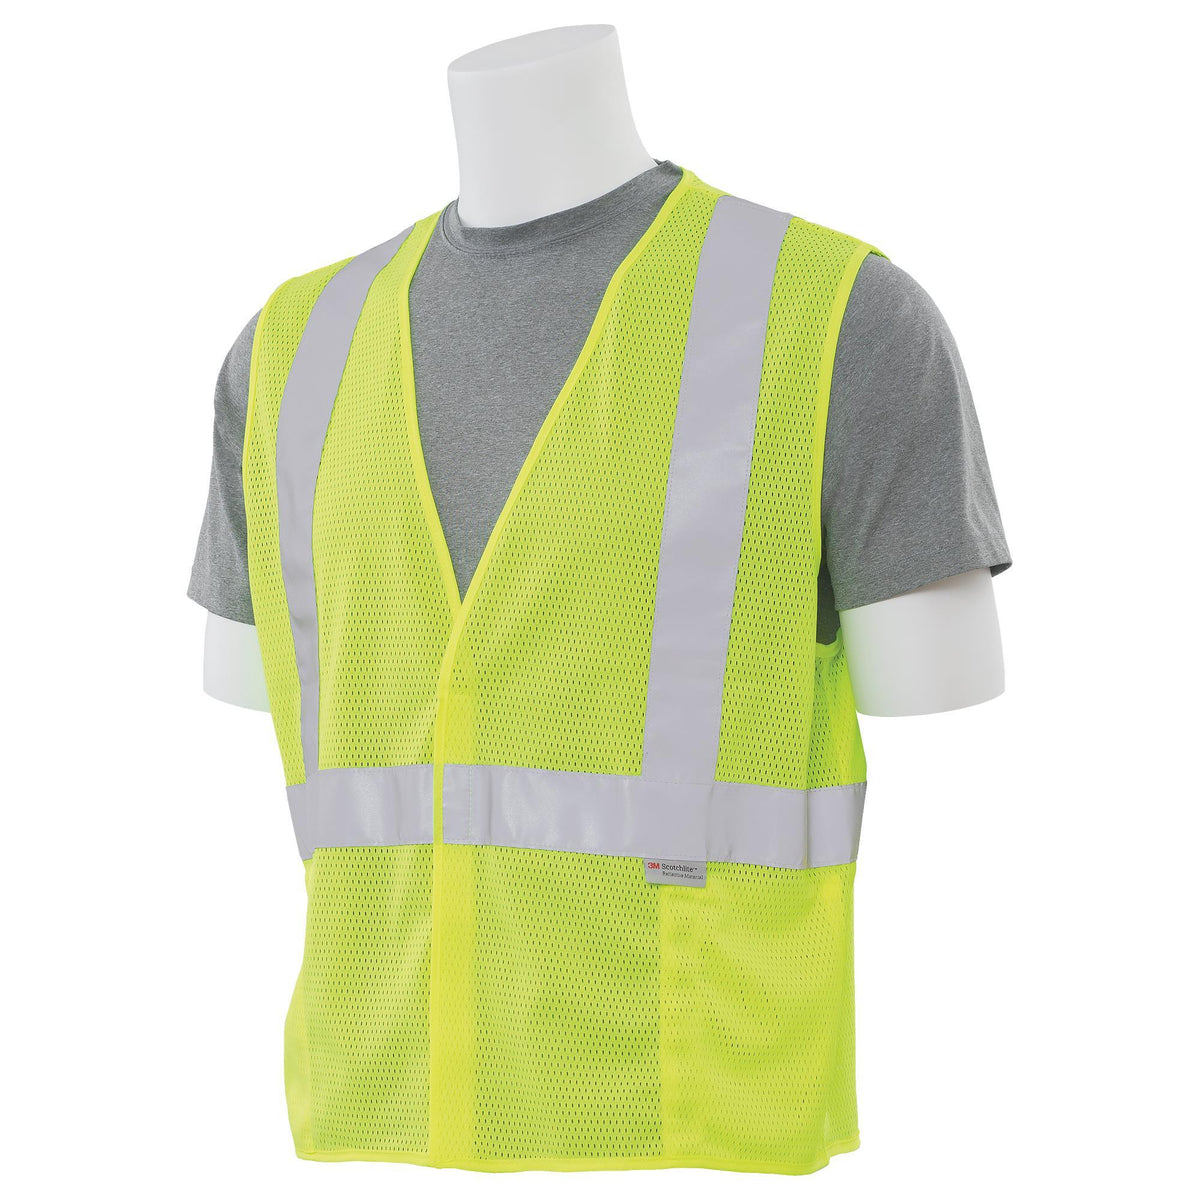 S15 Class 2 Mesh Safety Vest with 3M® Reflective Strips 1PC